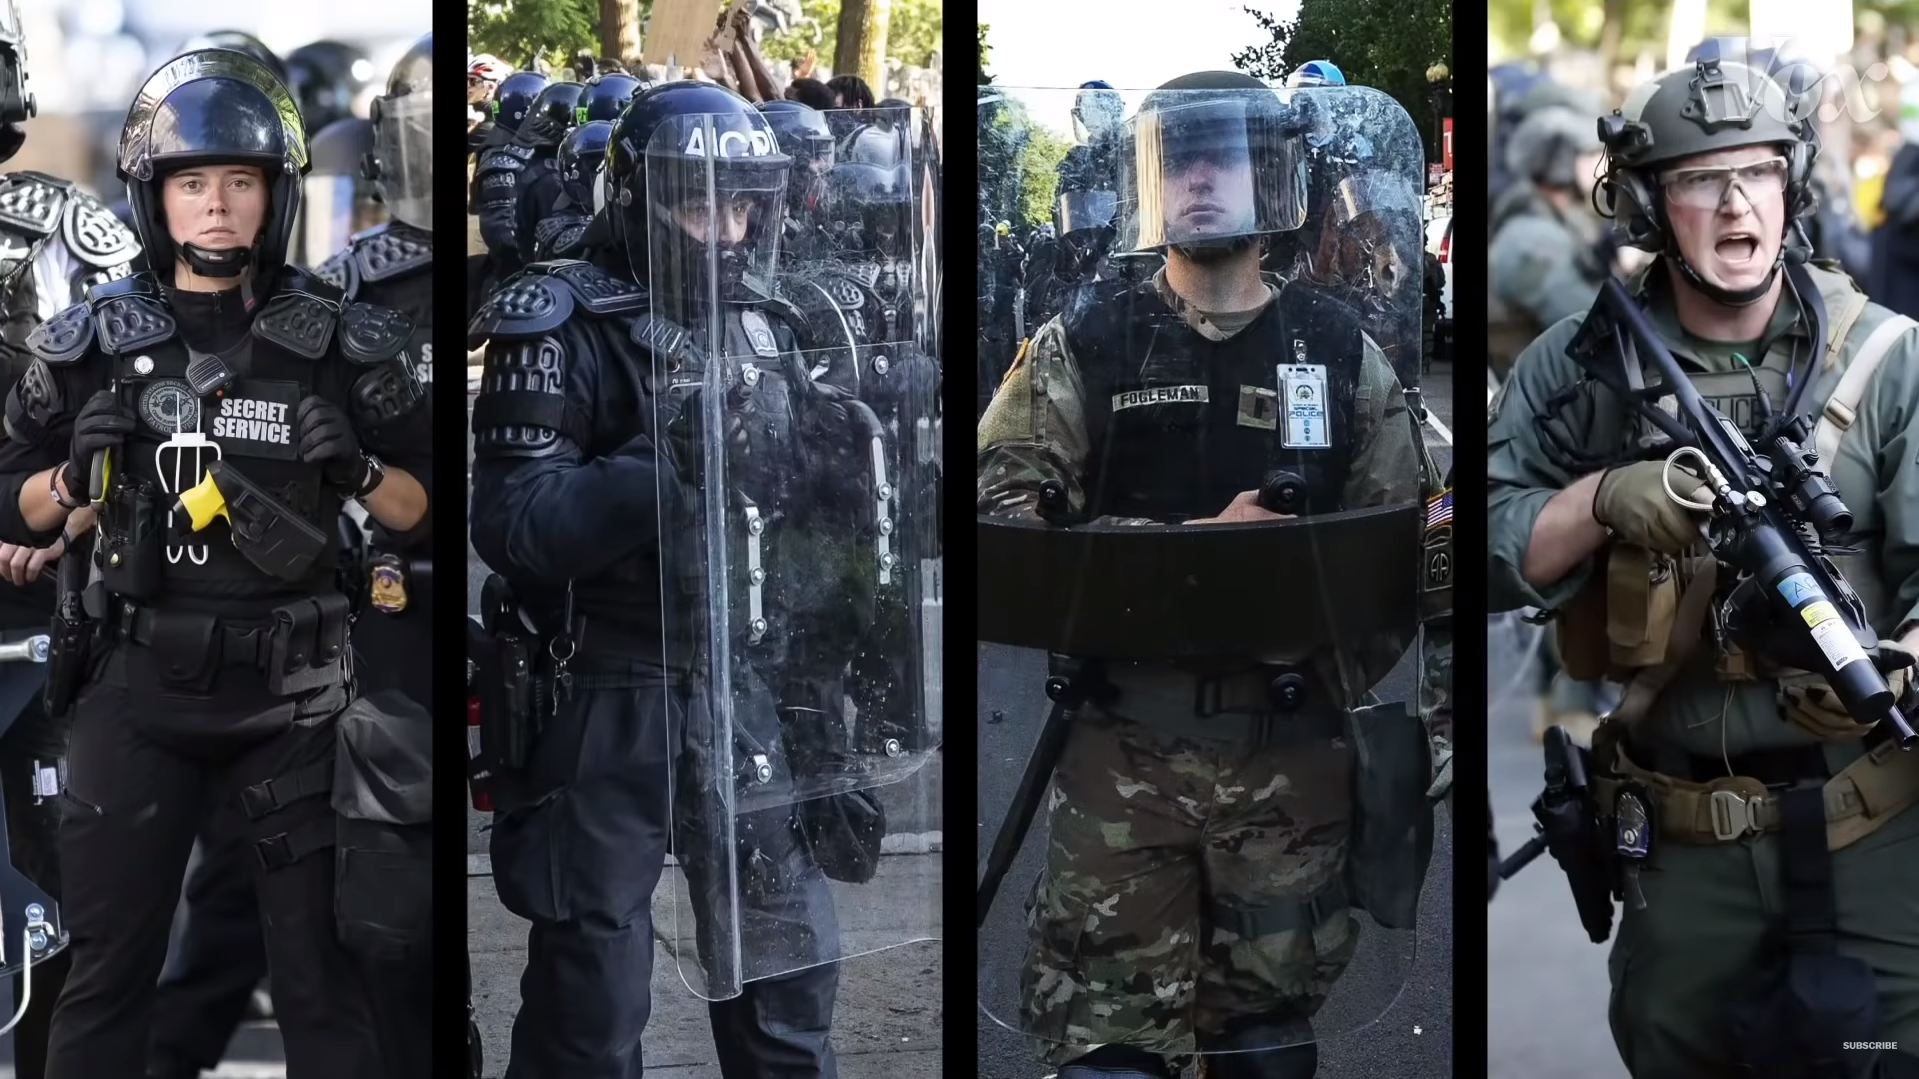 Why the US police is so brutal and militarized, by Luís Próspero, ILLUMINATION